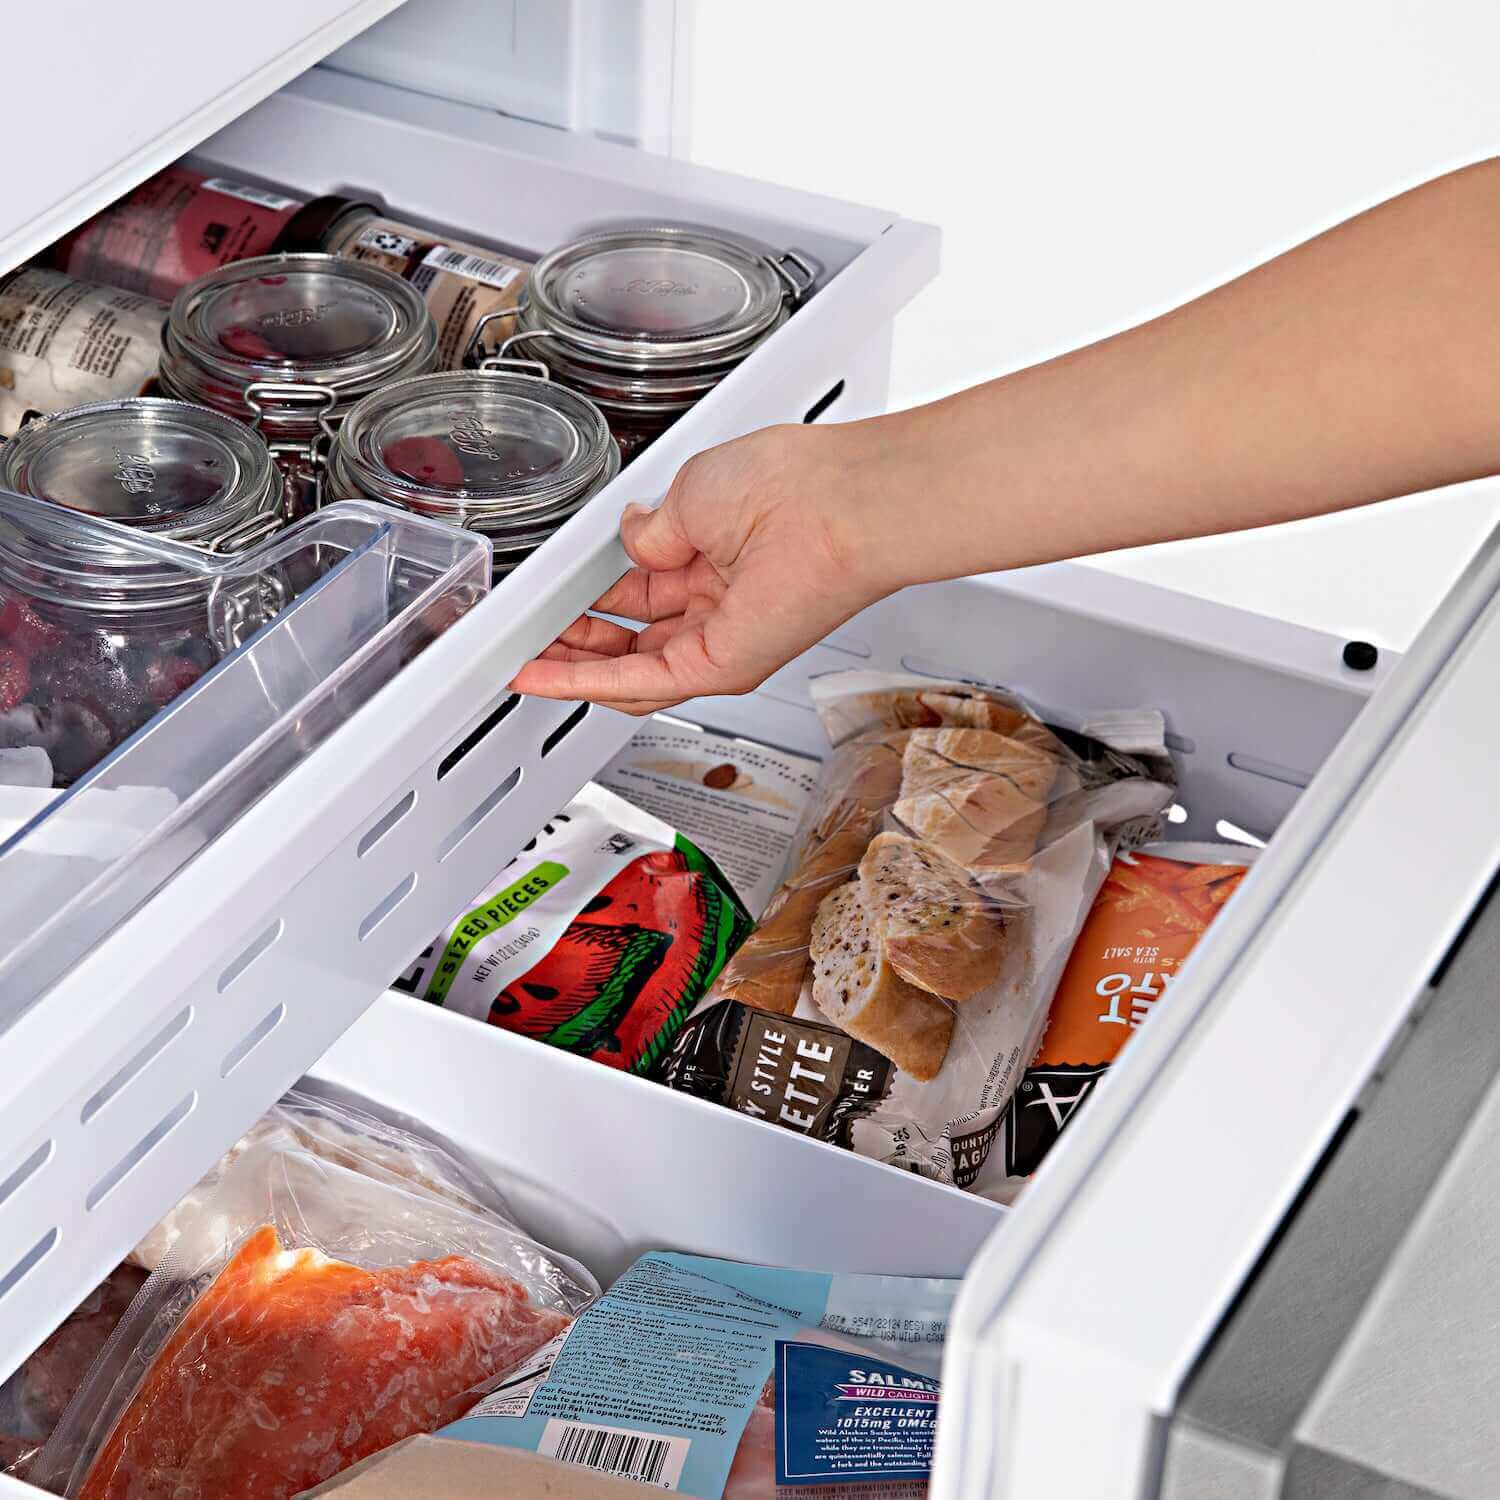 Person opening bottom freezer compartments on built-in refrigerator with food inside.